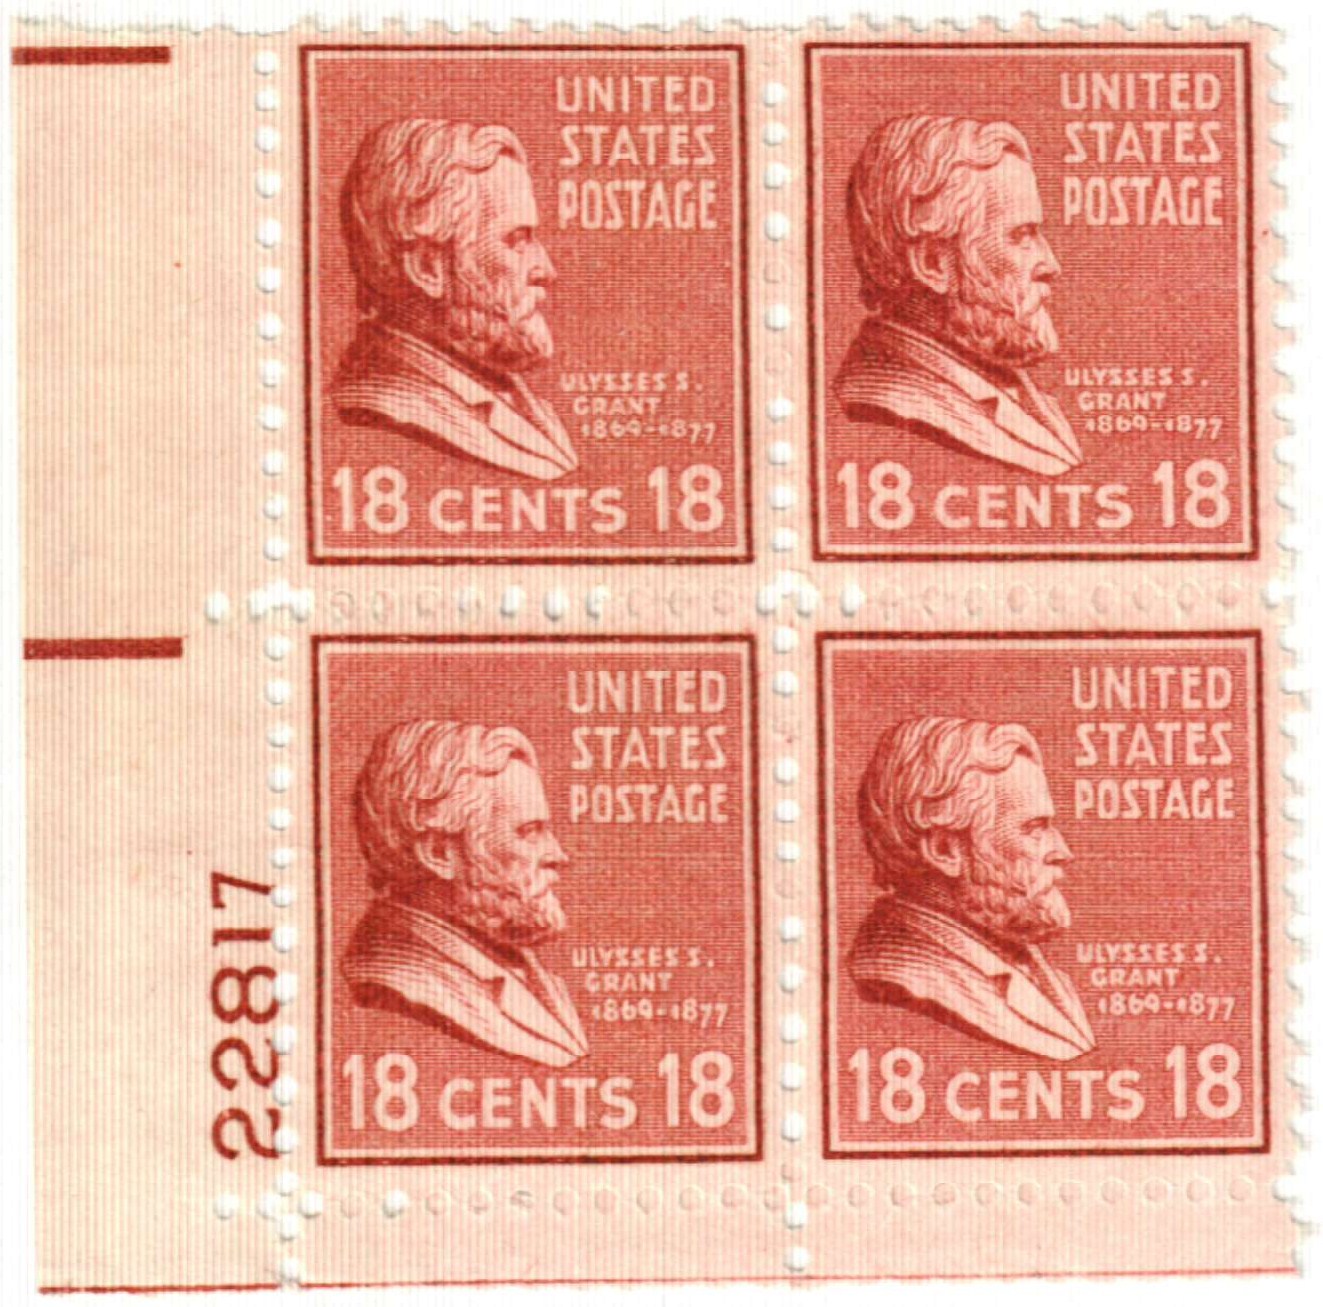 T&G STAMPS - US Stamps for Crafting: 1938 3c Swed/Finnish; Red